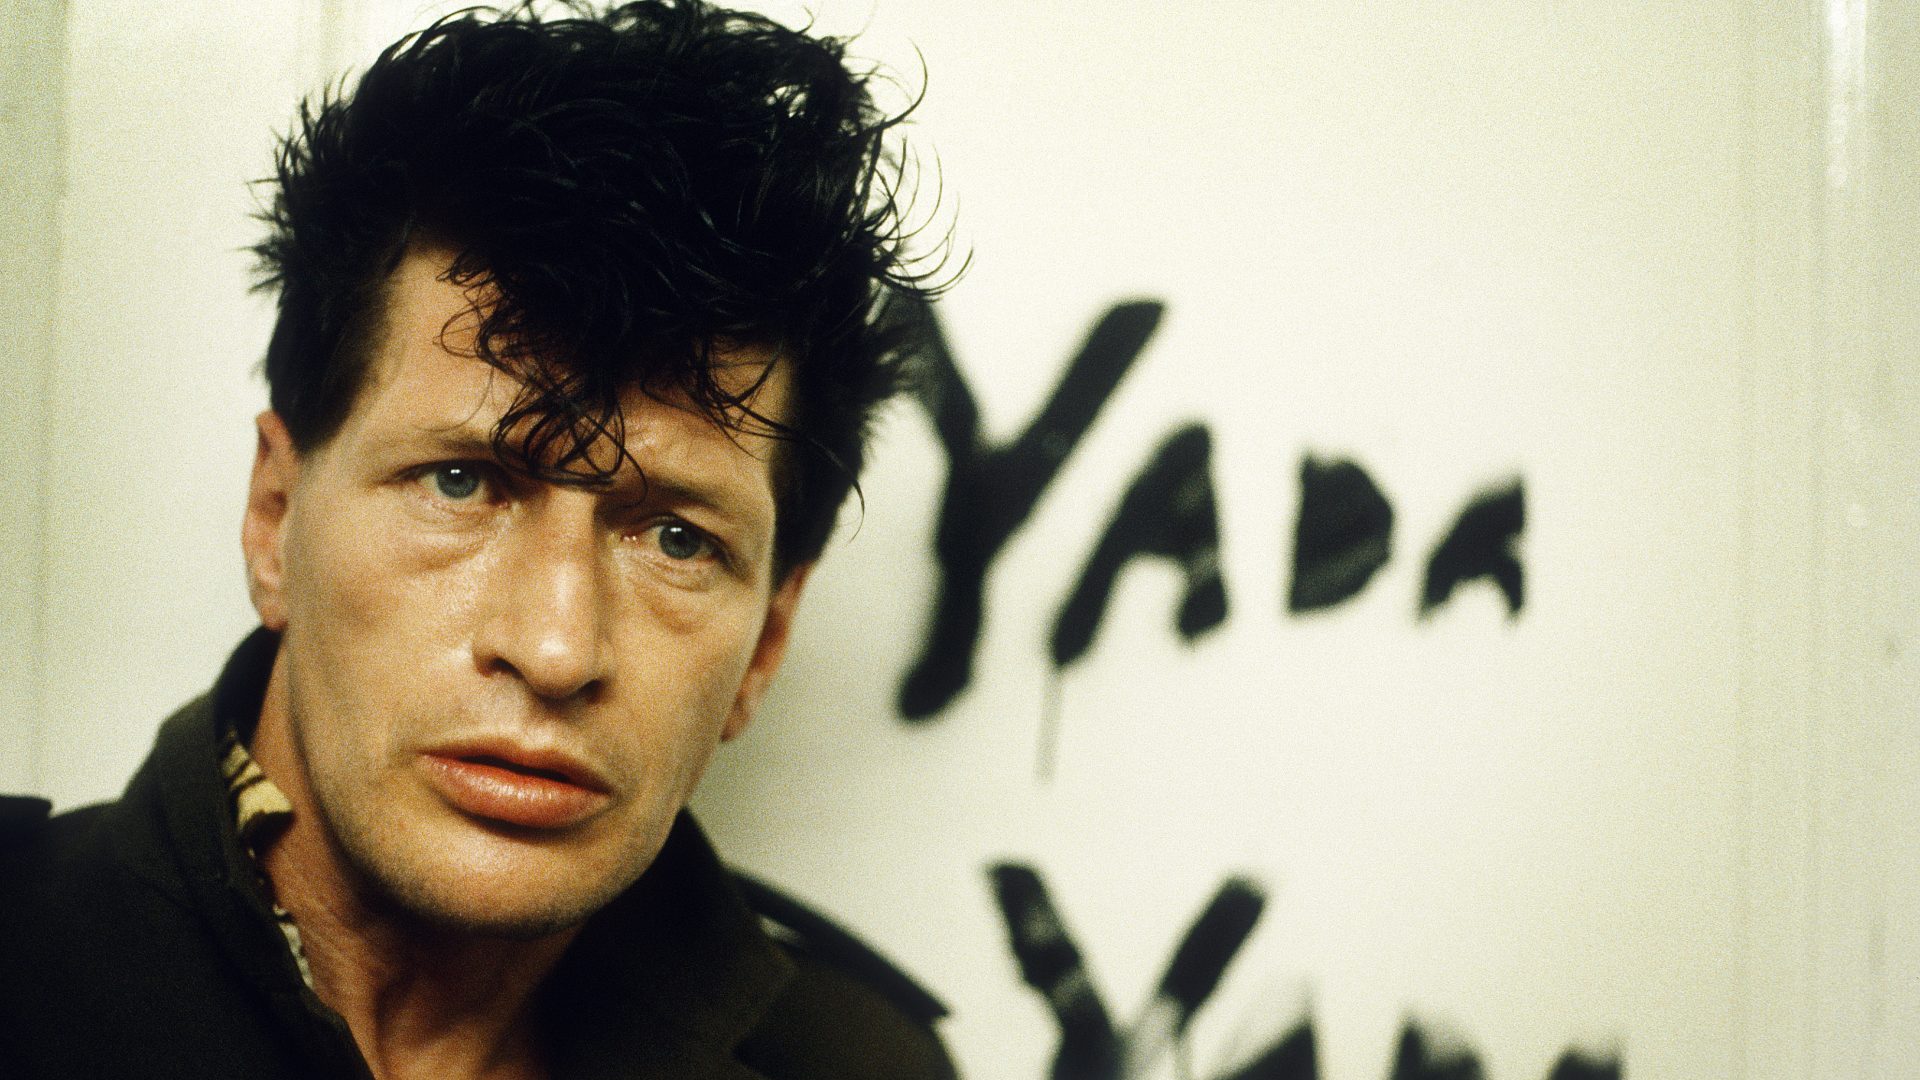 Dutch musician, 
painter, actor 
and poet Herman 
Brood, 1988. Photo: Gie Knaeps/
Getty